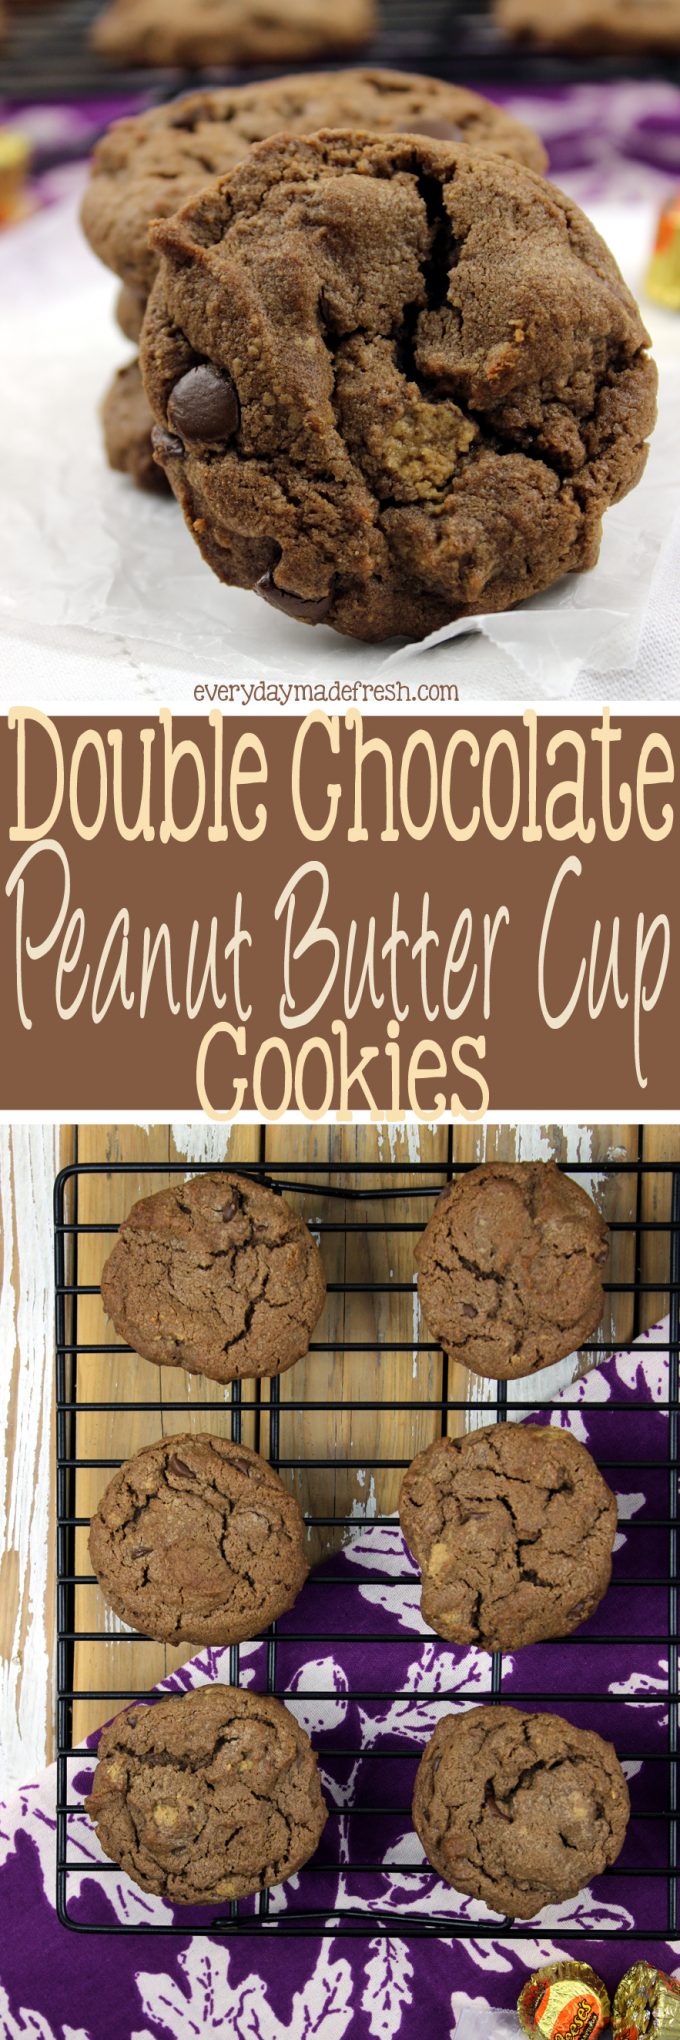 A chocolate chip cookie and a peanut butter cookie got married, and together they had these Double Chocolate Chip Peanut Butter Cup Cookies! It's a perfect match! | EverydayMadeFresh.com